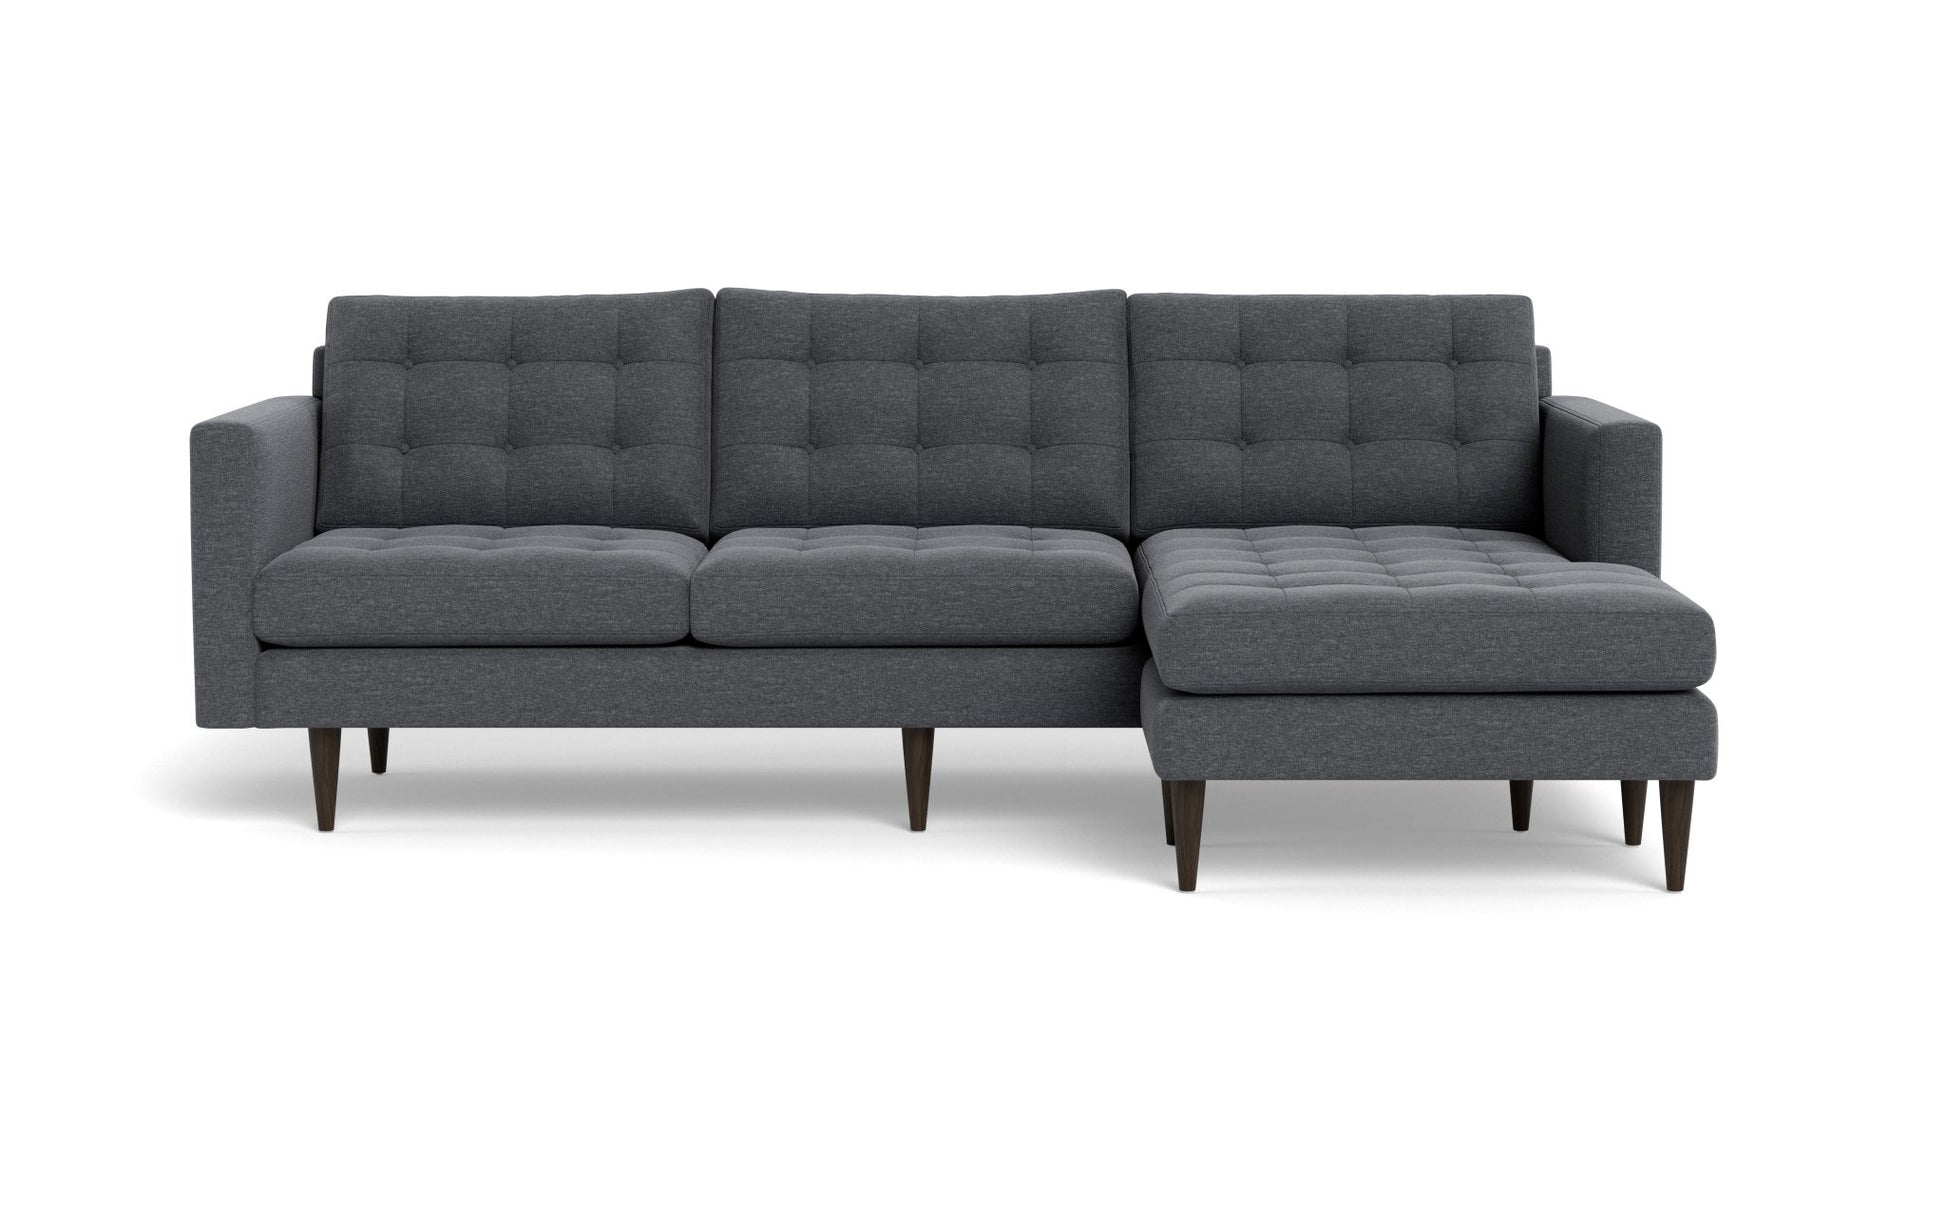 Wallace Reversible Chaise Sofa - Bennett Charcoal